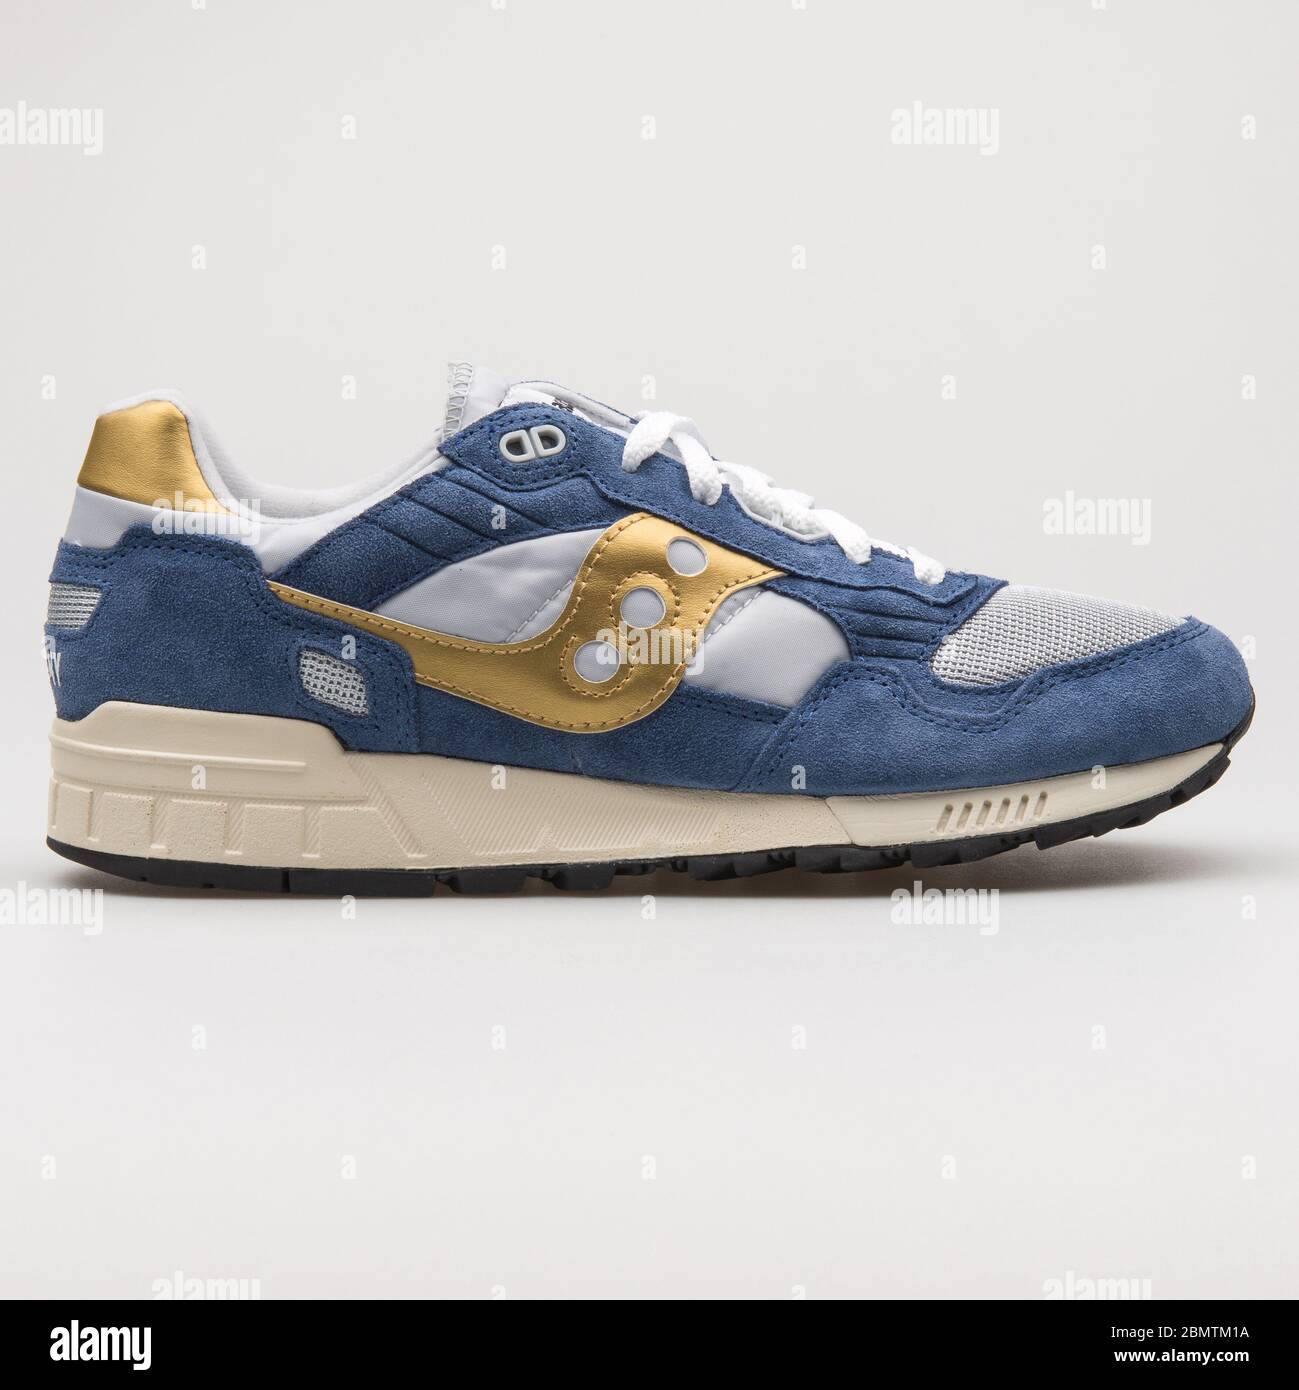 Saucony Shadow 5000 Vintage blue, gold 